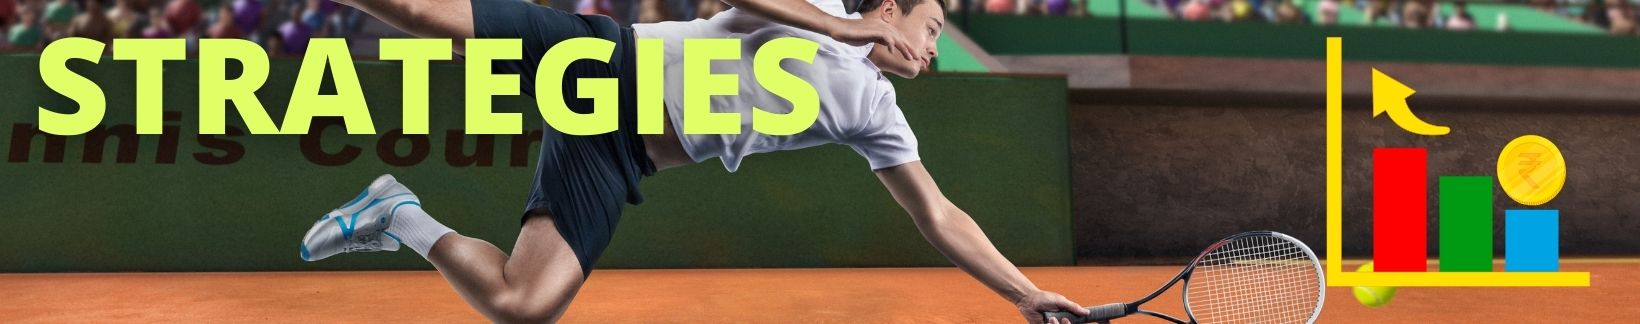 Strategies for betting on tennis in India